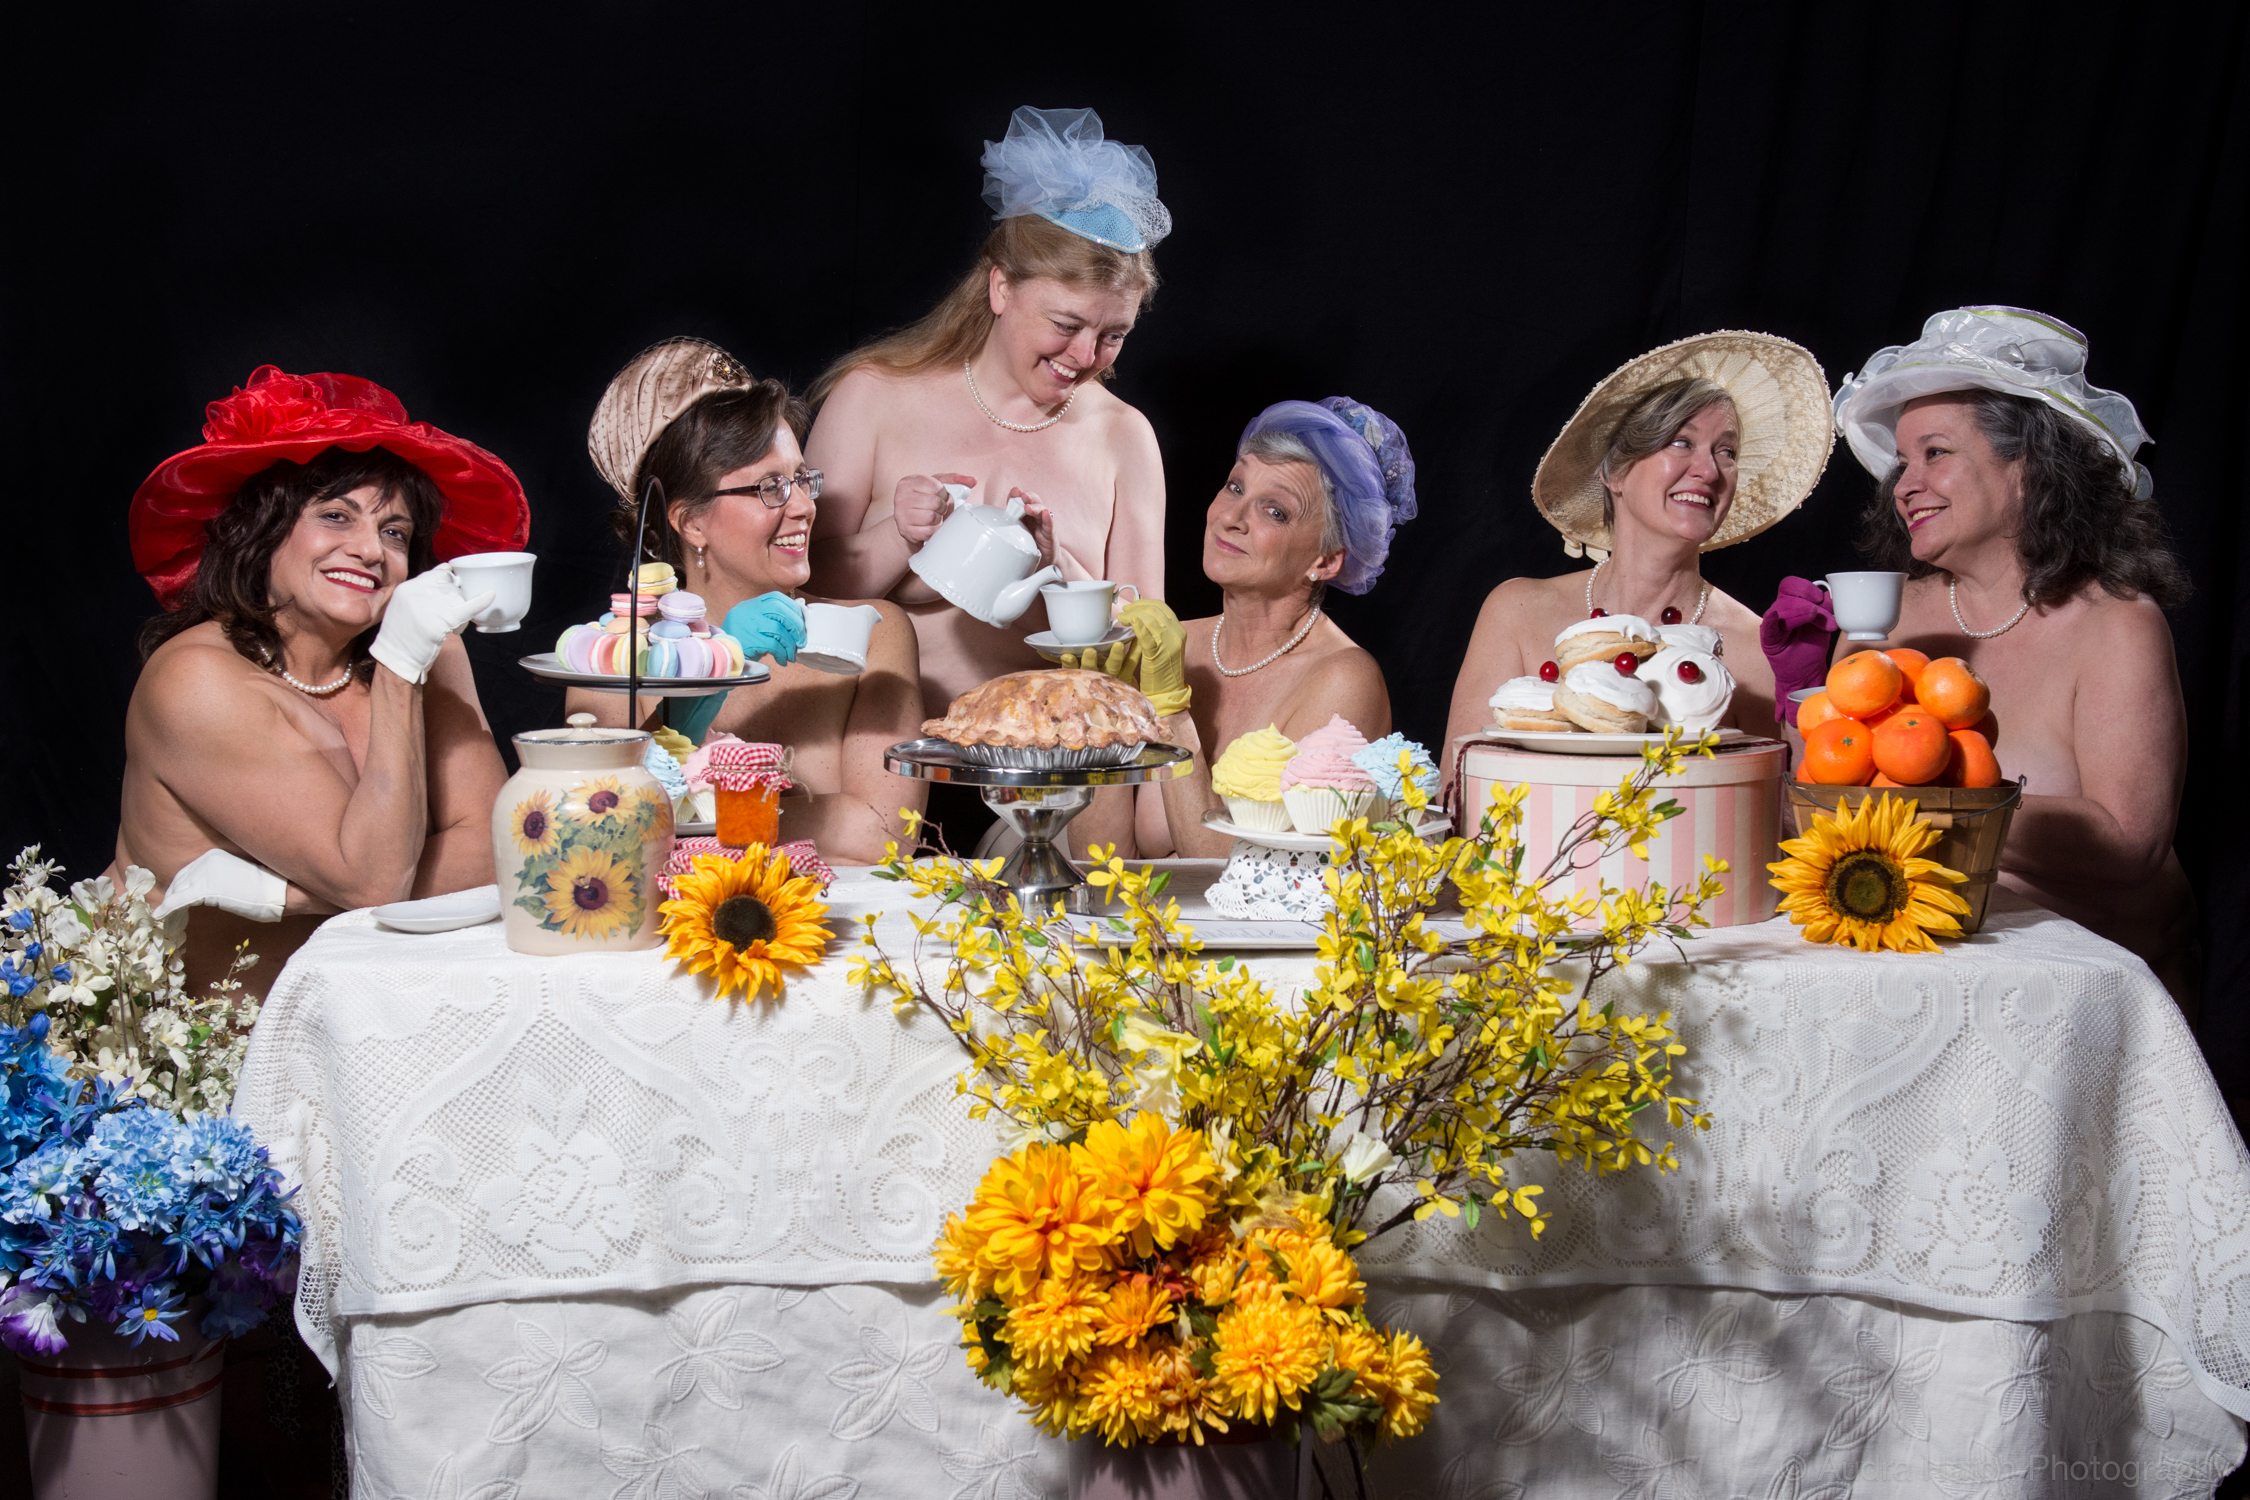 Calendar Girls' exposes powerful drama dressed in a comedy at City